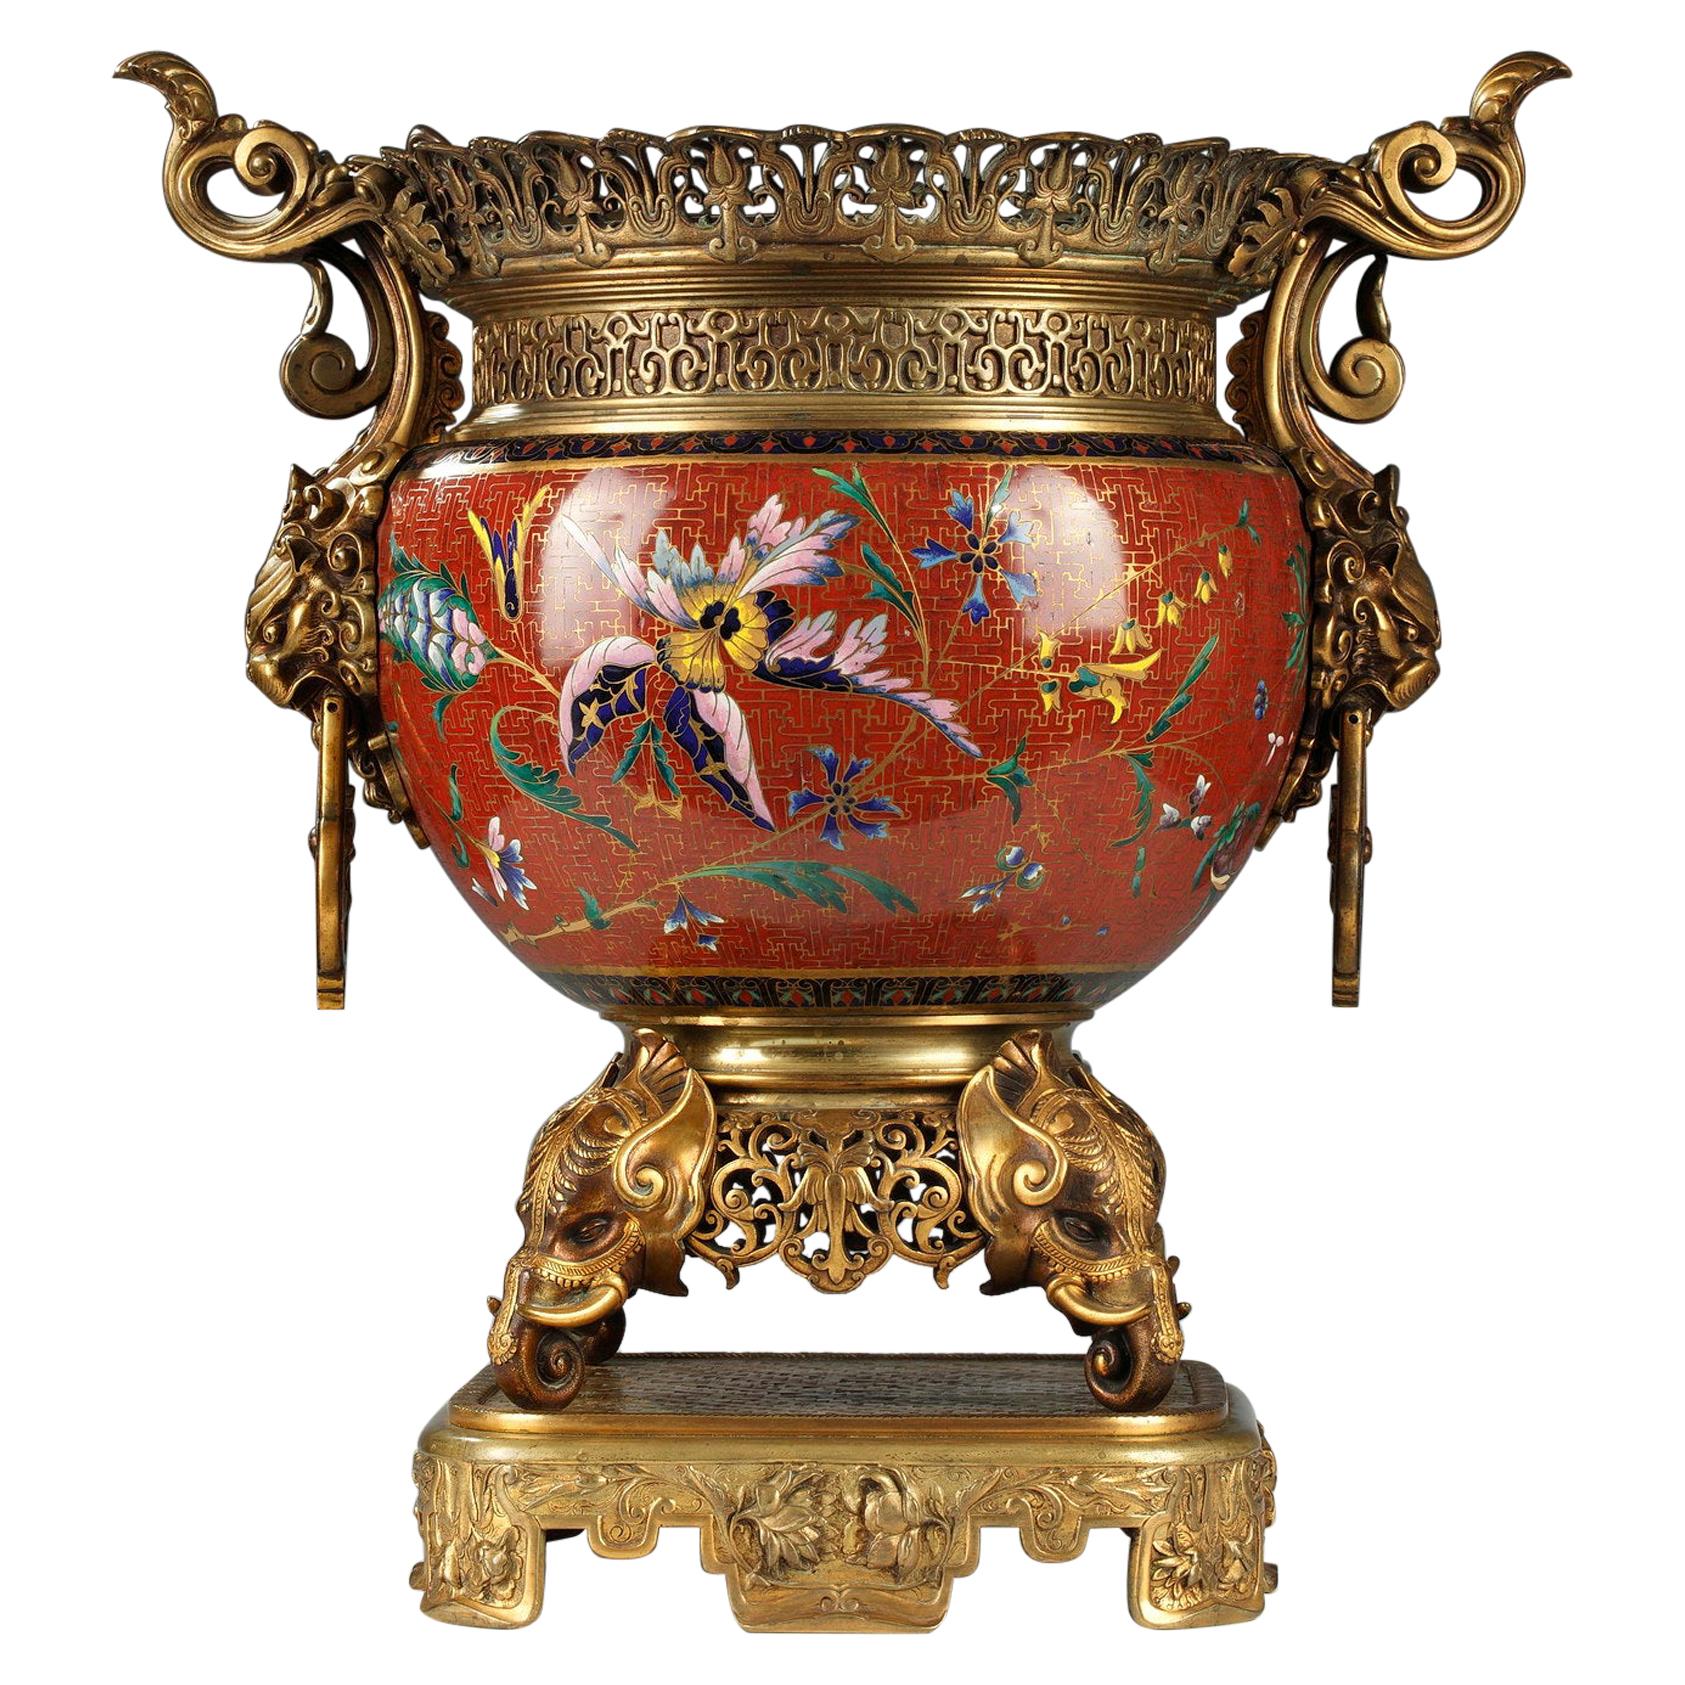 Japanese Style Planter Attributed to l'Escalier de Cristal, France, circa 1880